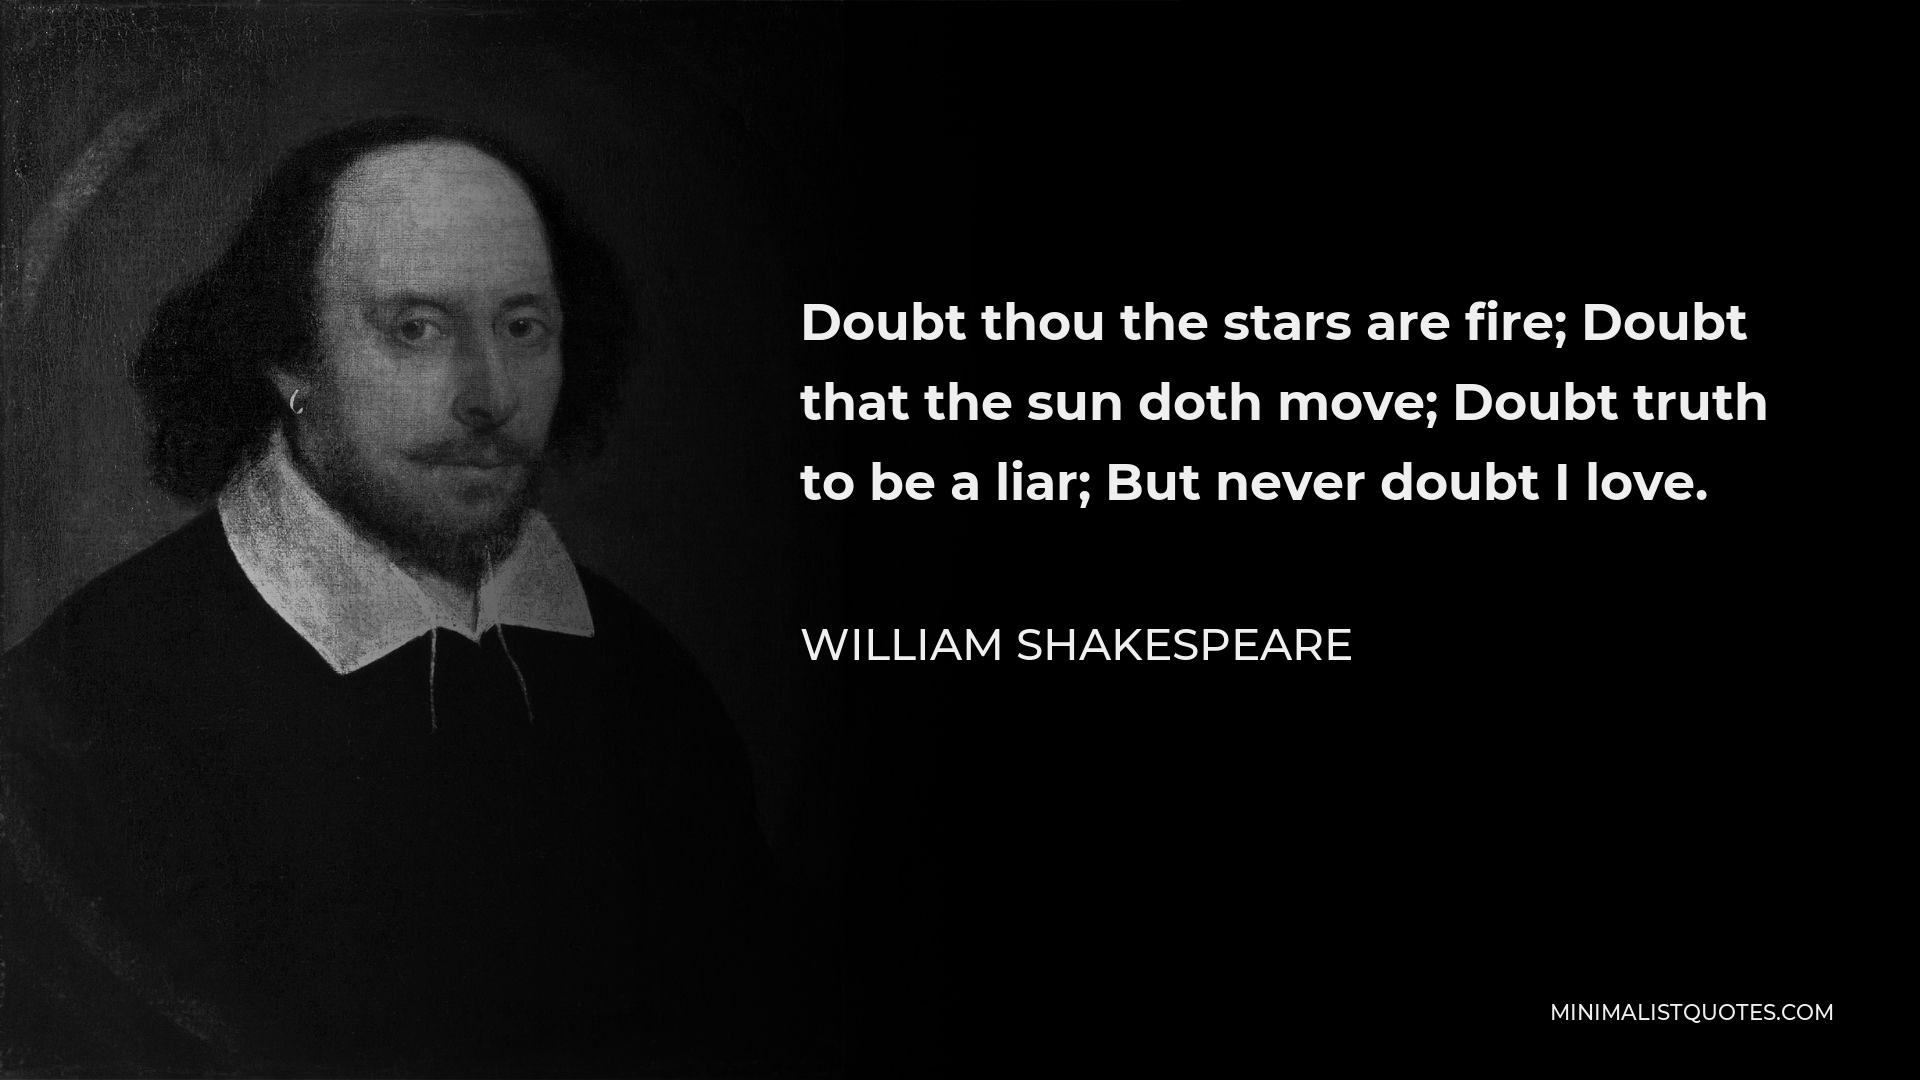 William Shakespeare Quote - Doubt thou the stars are fire; Doubt that the sun doth move; Doubt truth to be a liar; But never doubt I love.